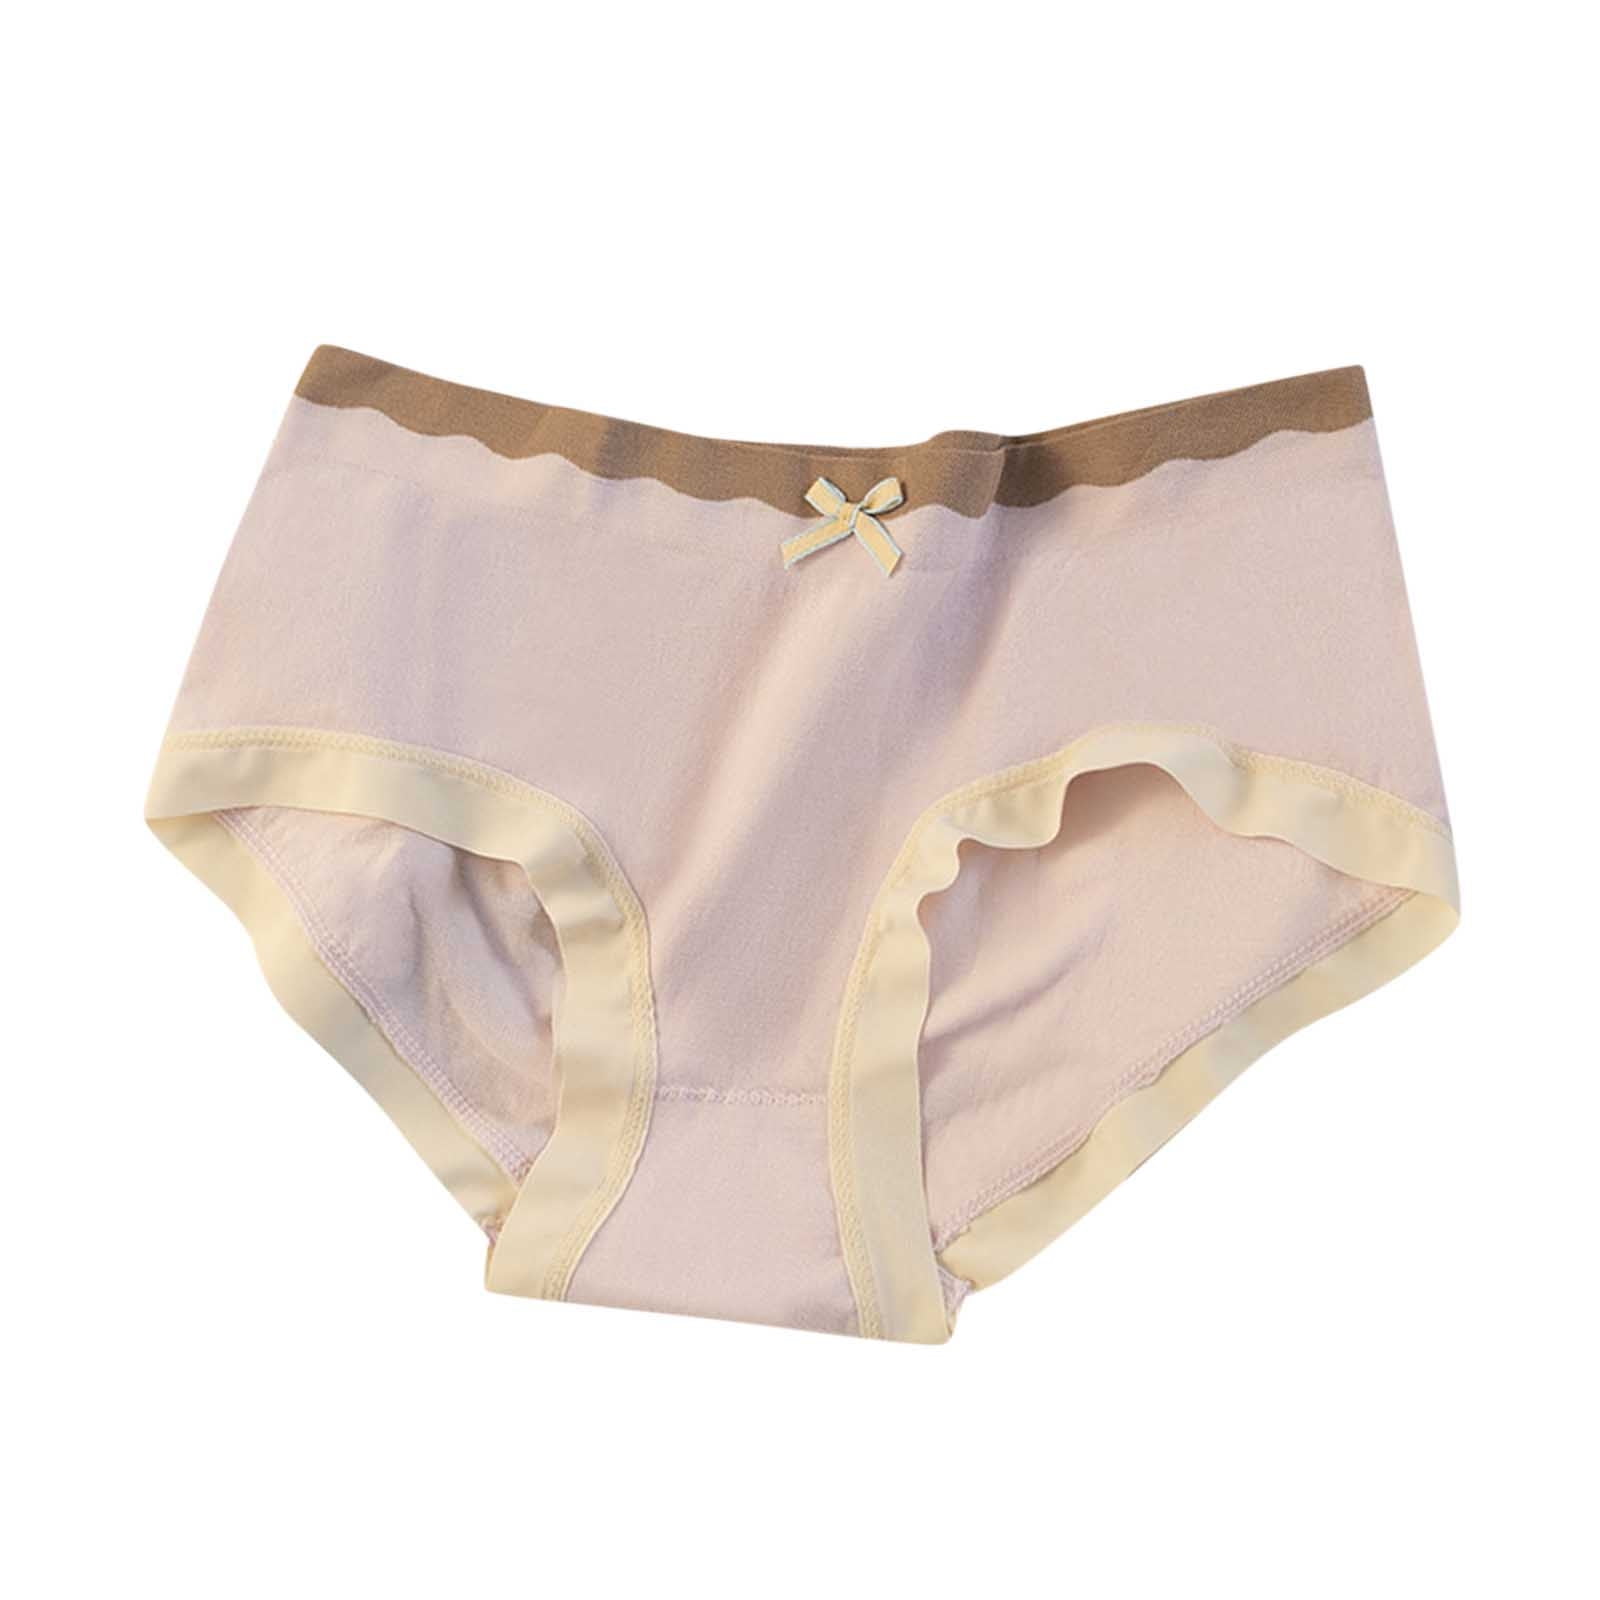 Womens Cotton Briefs Underwear without Elastic Leg Openings